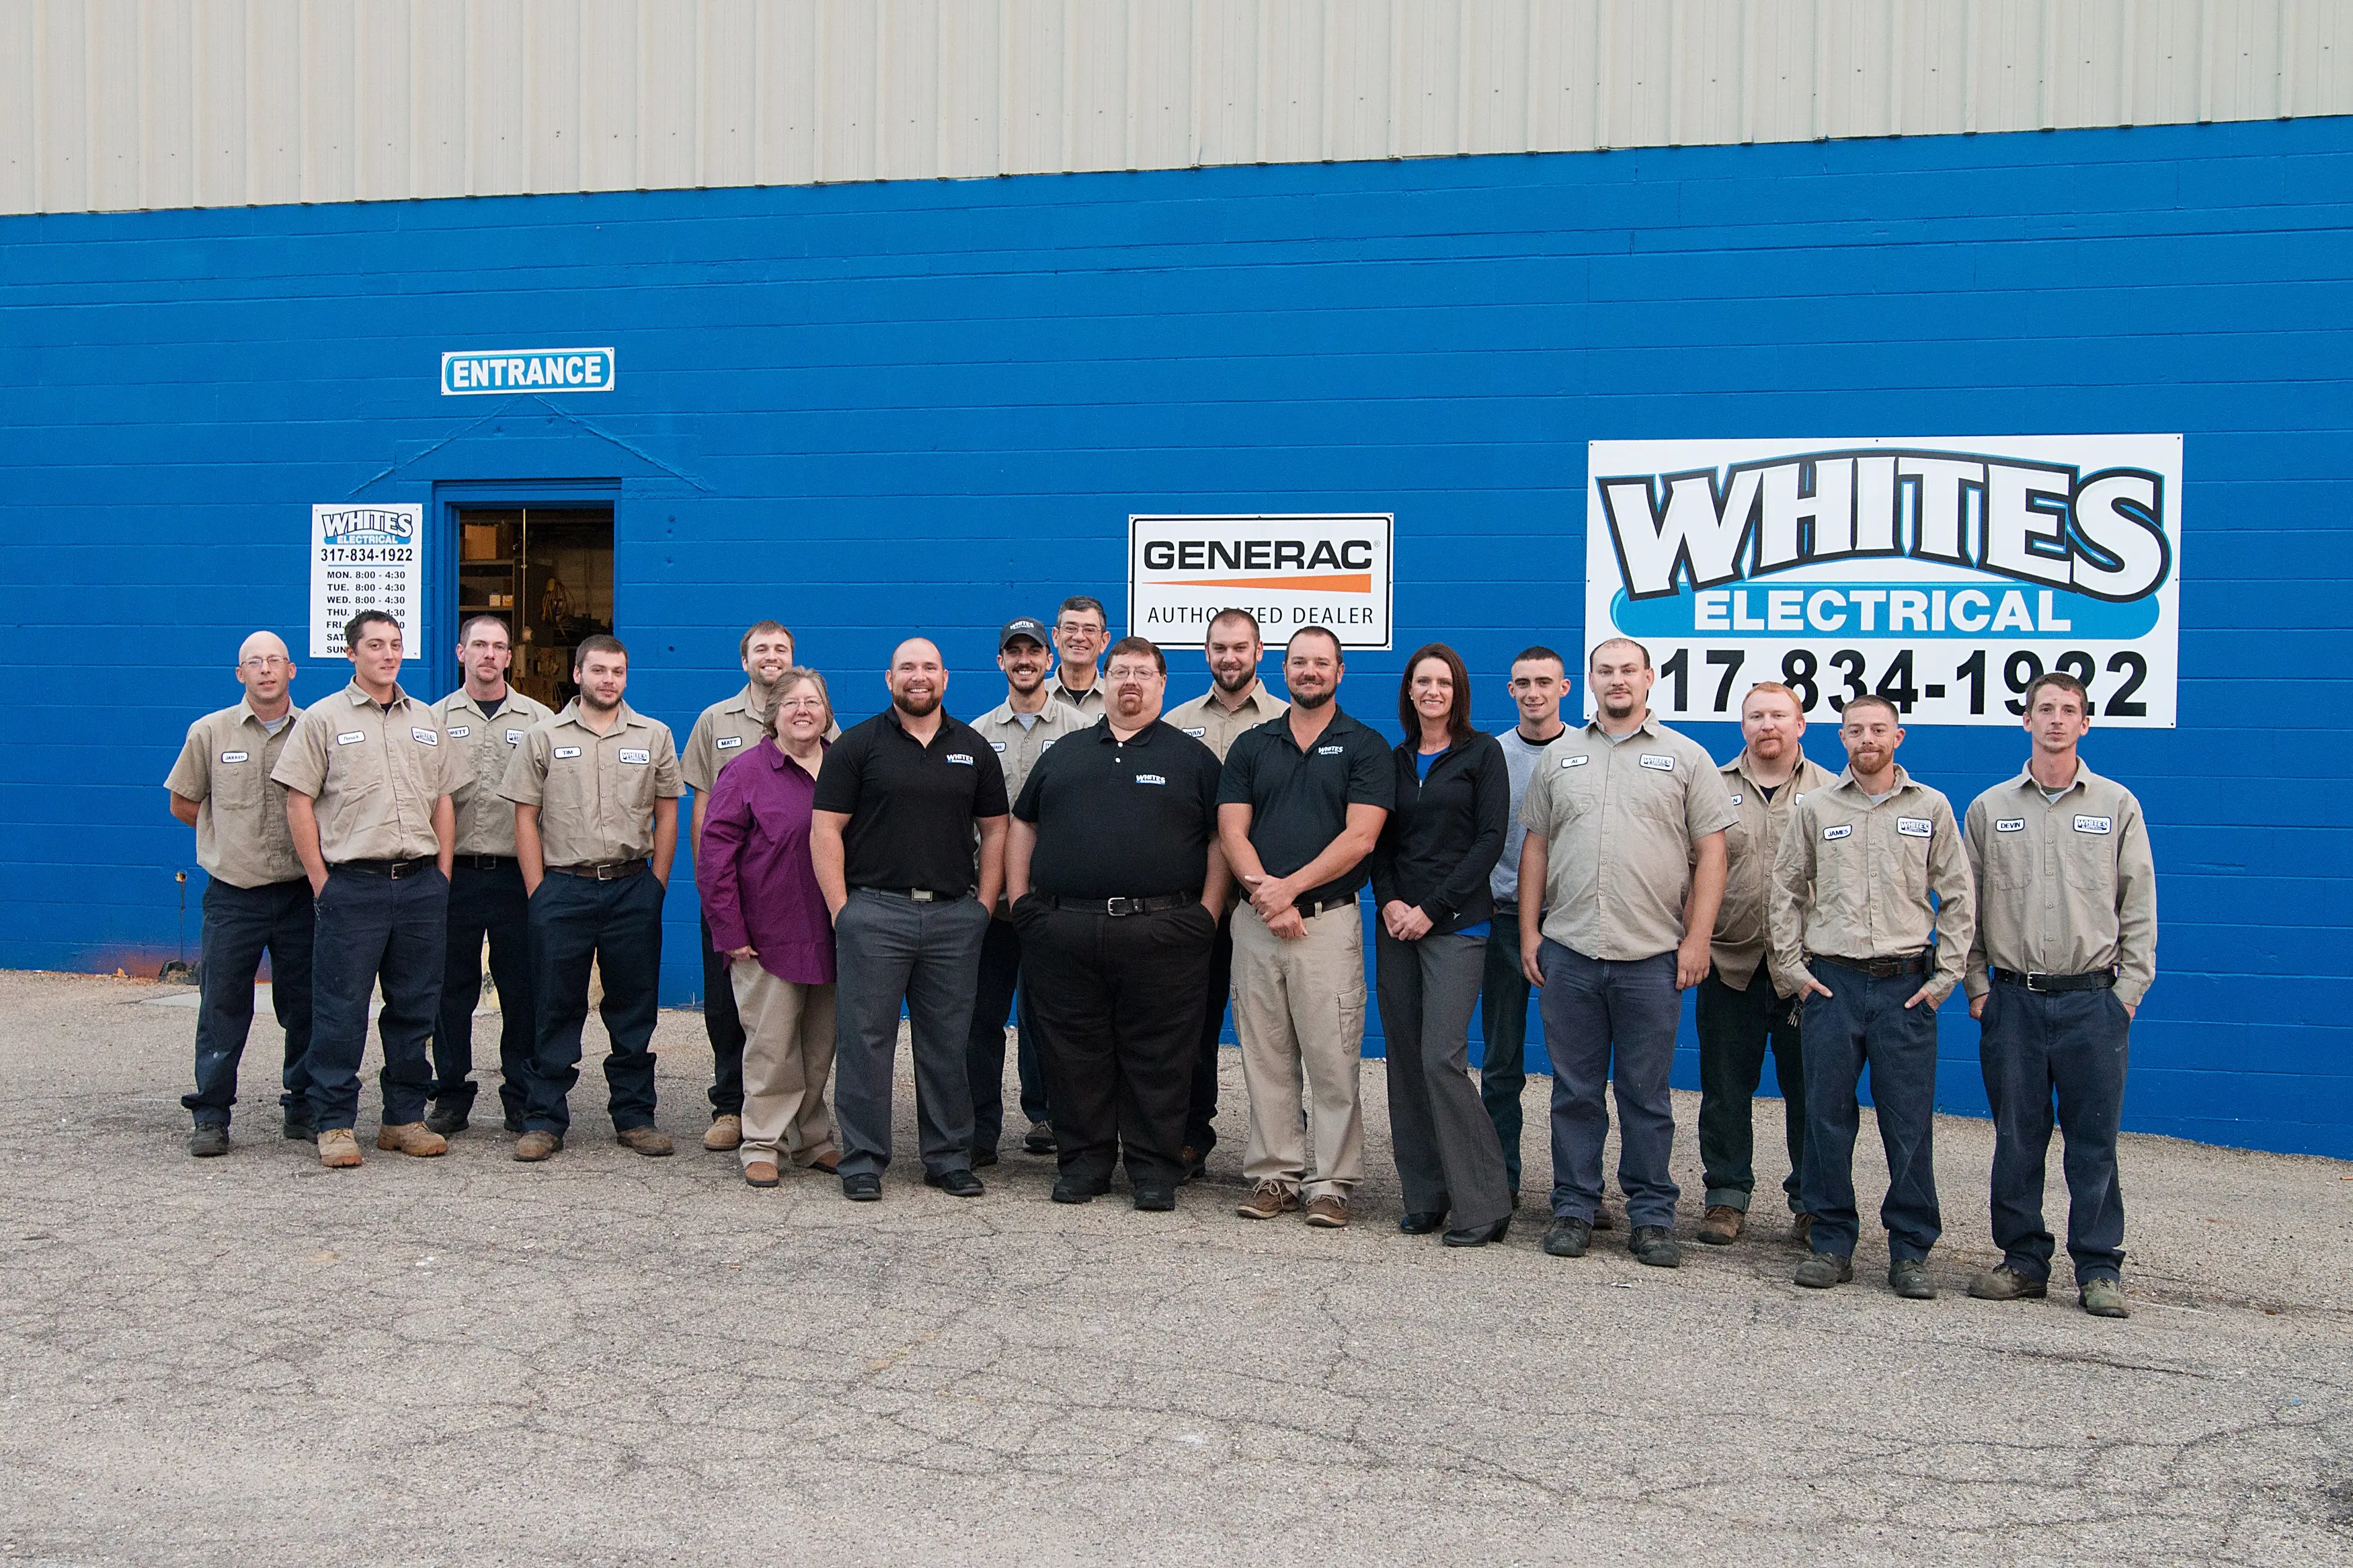 WHITE’S ELECTRICAL IS YOUR FULL SERVICE ELECTRICAL CONTRACTOR